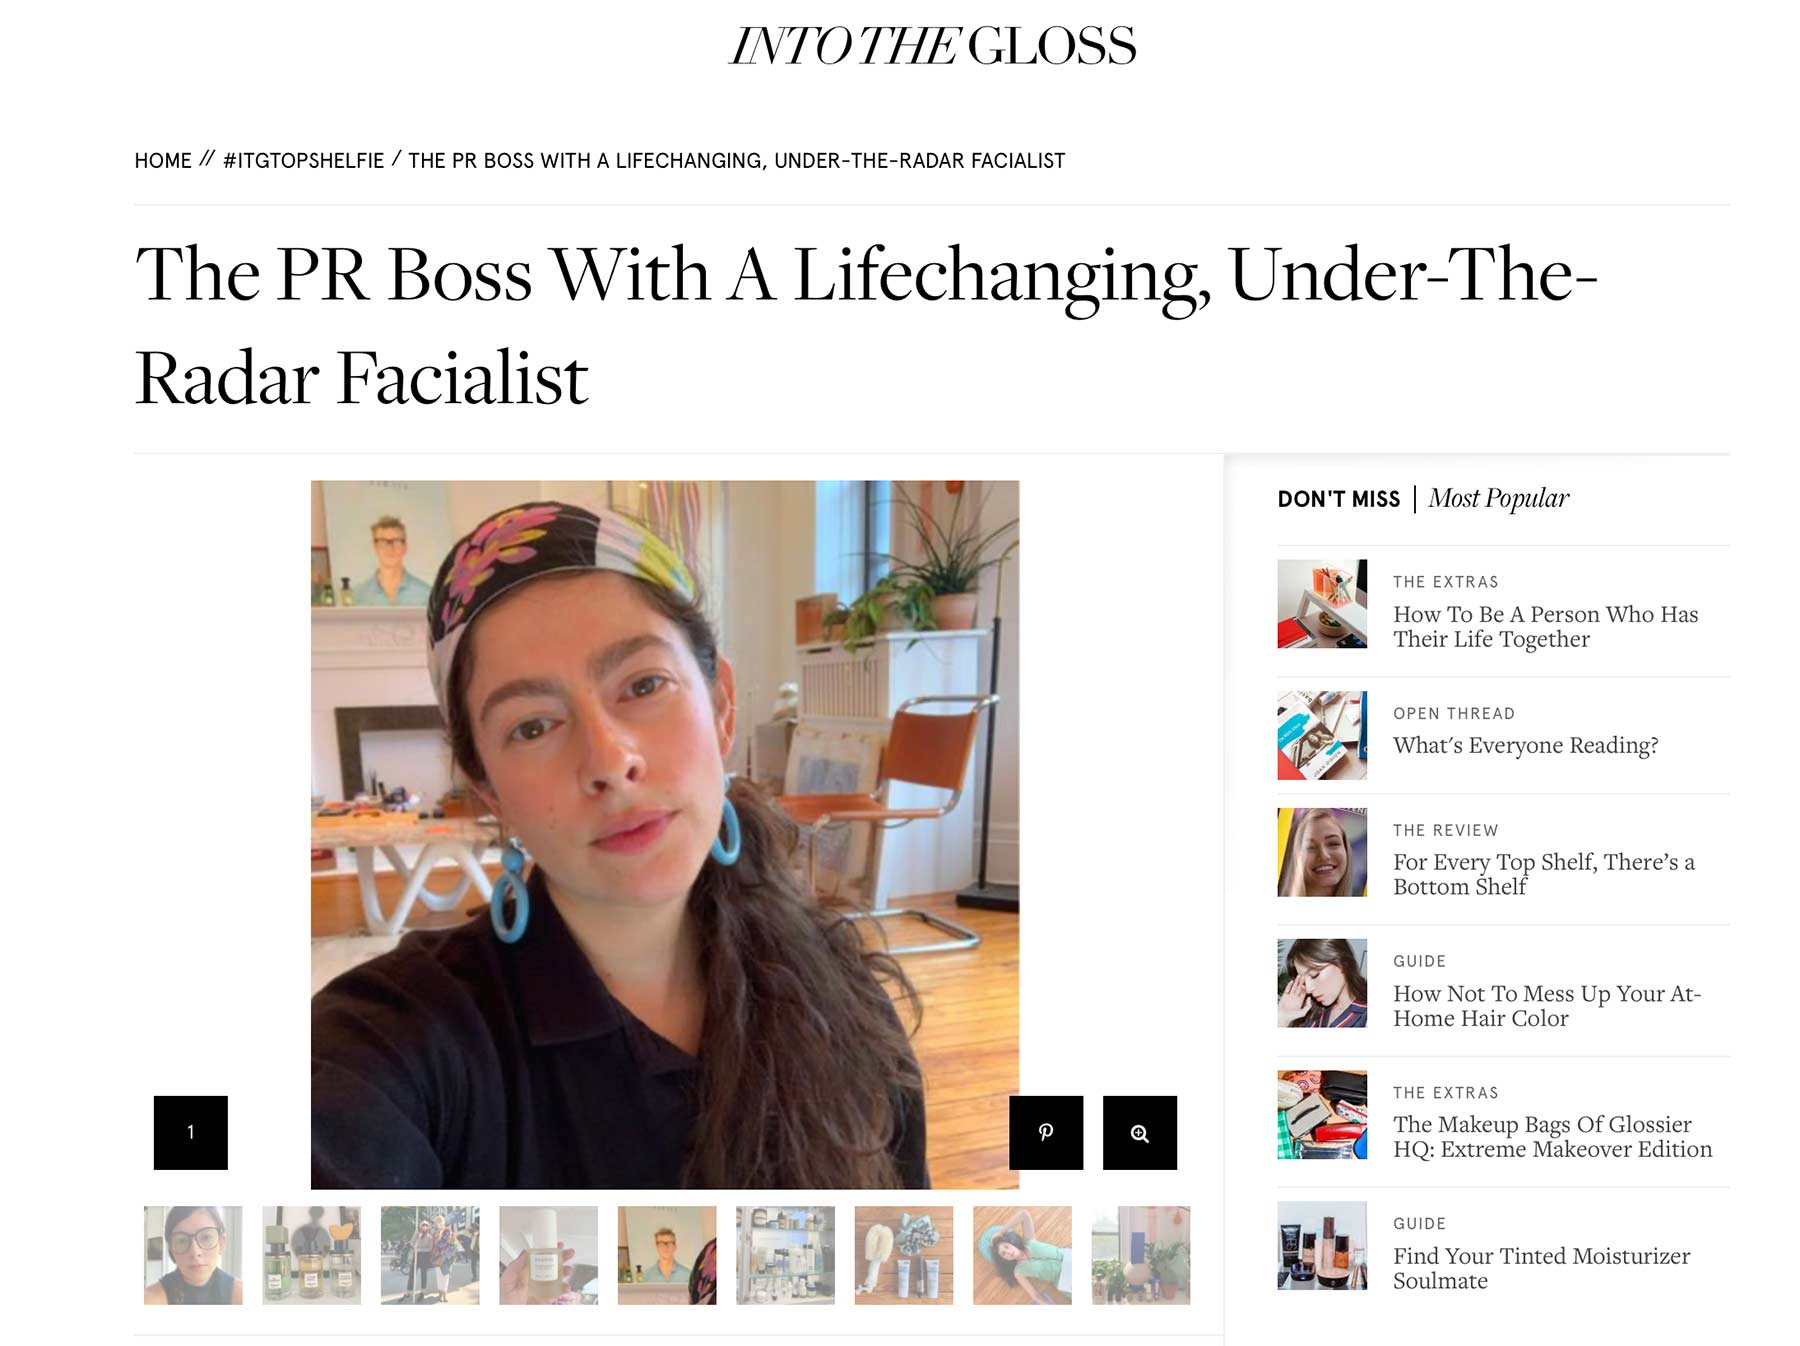 Screenshot of the Glossier blog, depicting an interview with a PR manager